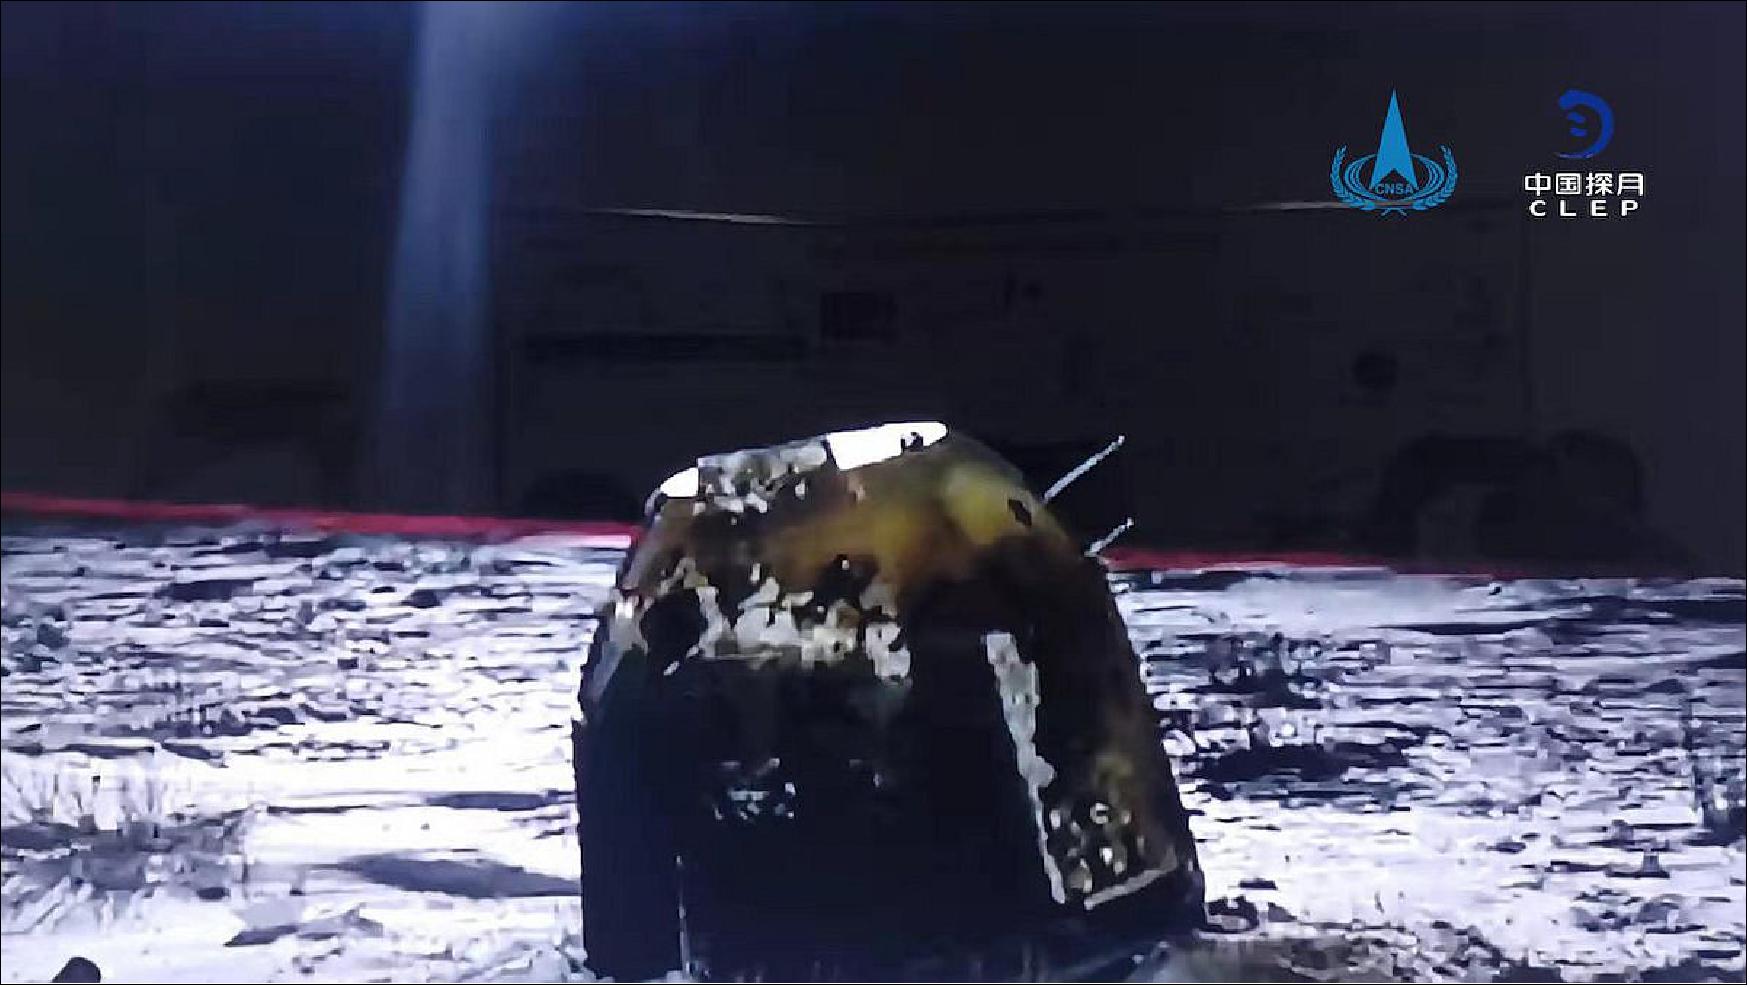 Figure 16: The Chang’e-5 sample return capsule with a mass of ~300 kg landed in China’s Inner Mongolia region at 17:59 GMT on 16 December 2020 (image credit: CNSA)